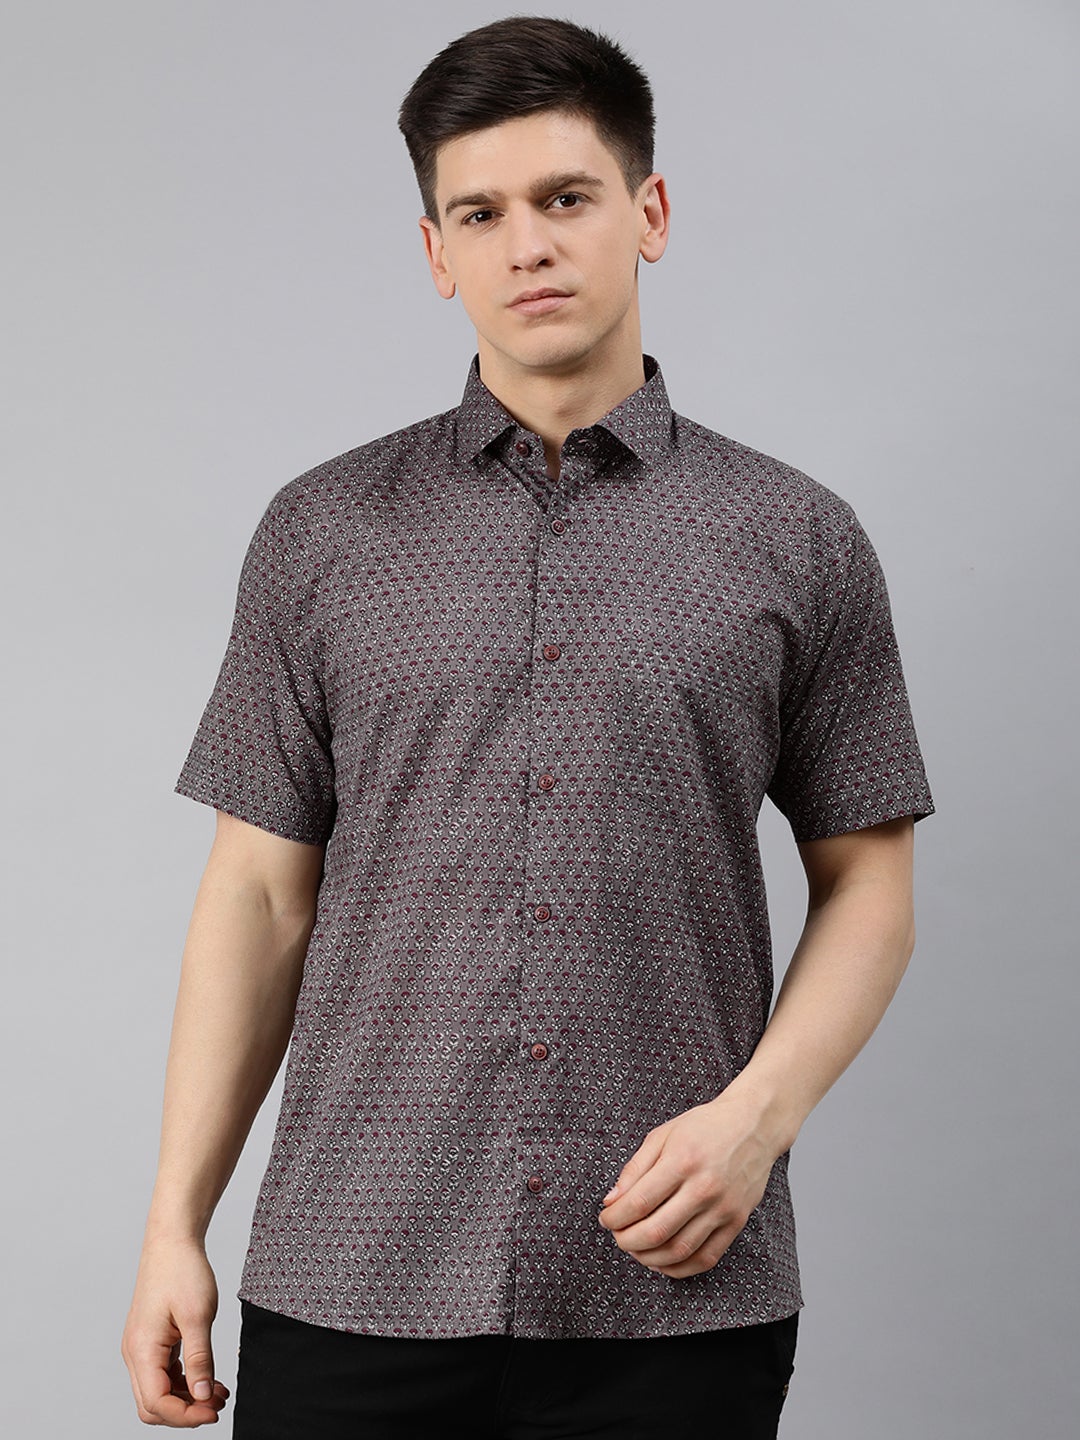 Gray Cotton Short Sleeves Shirts For Men